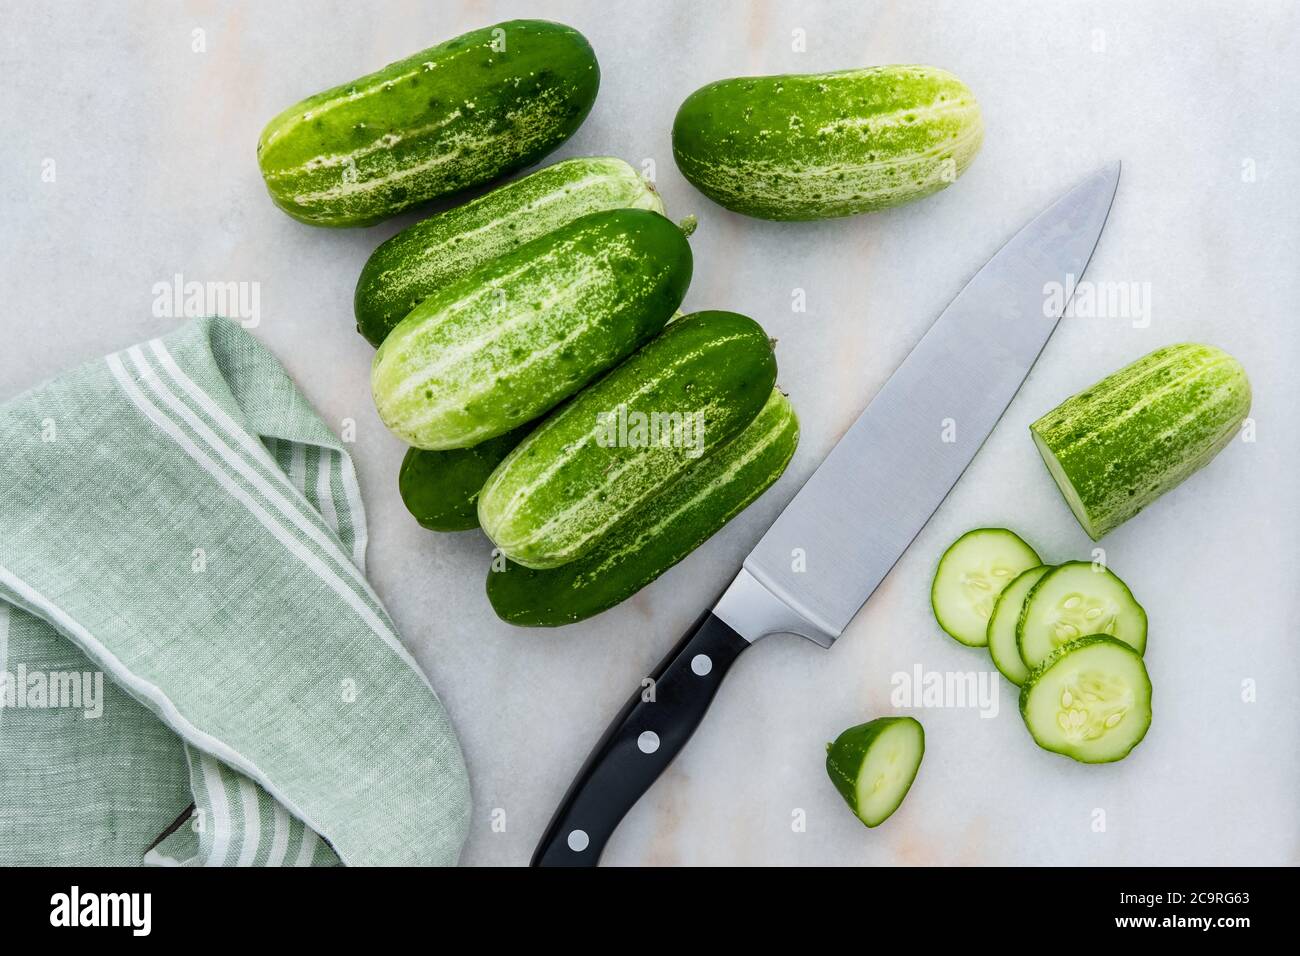 Photograph of freshly picked organic pickling cucumbers, being prepared for slicing with a chef's knife and dishtowel on kitchen counter Stock Photo